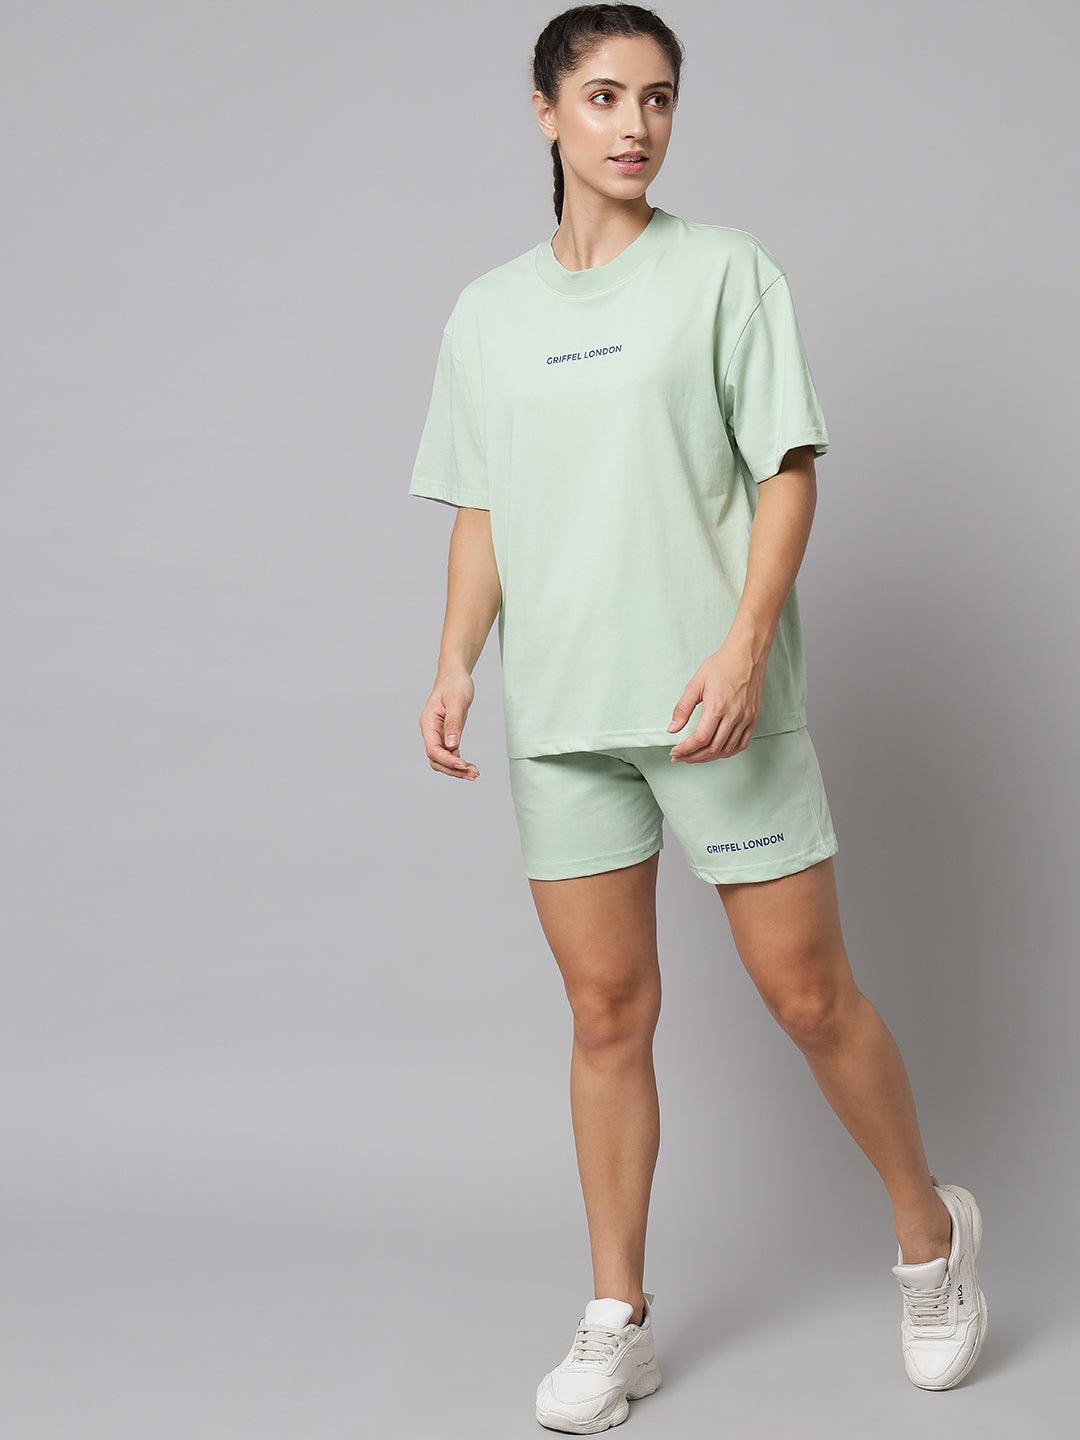 GRIFFEL Women Sea Green Printed Oversized Loose fit T-shirt and Short Set - griffel